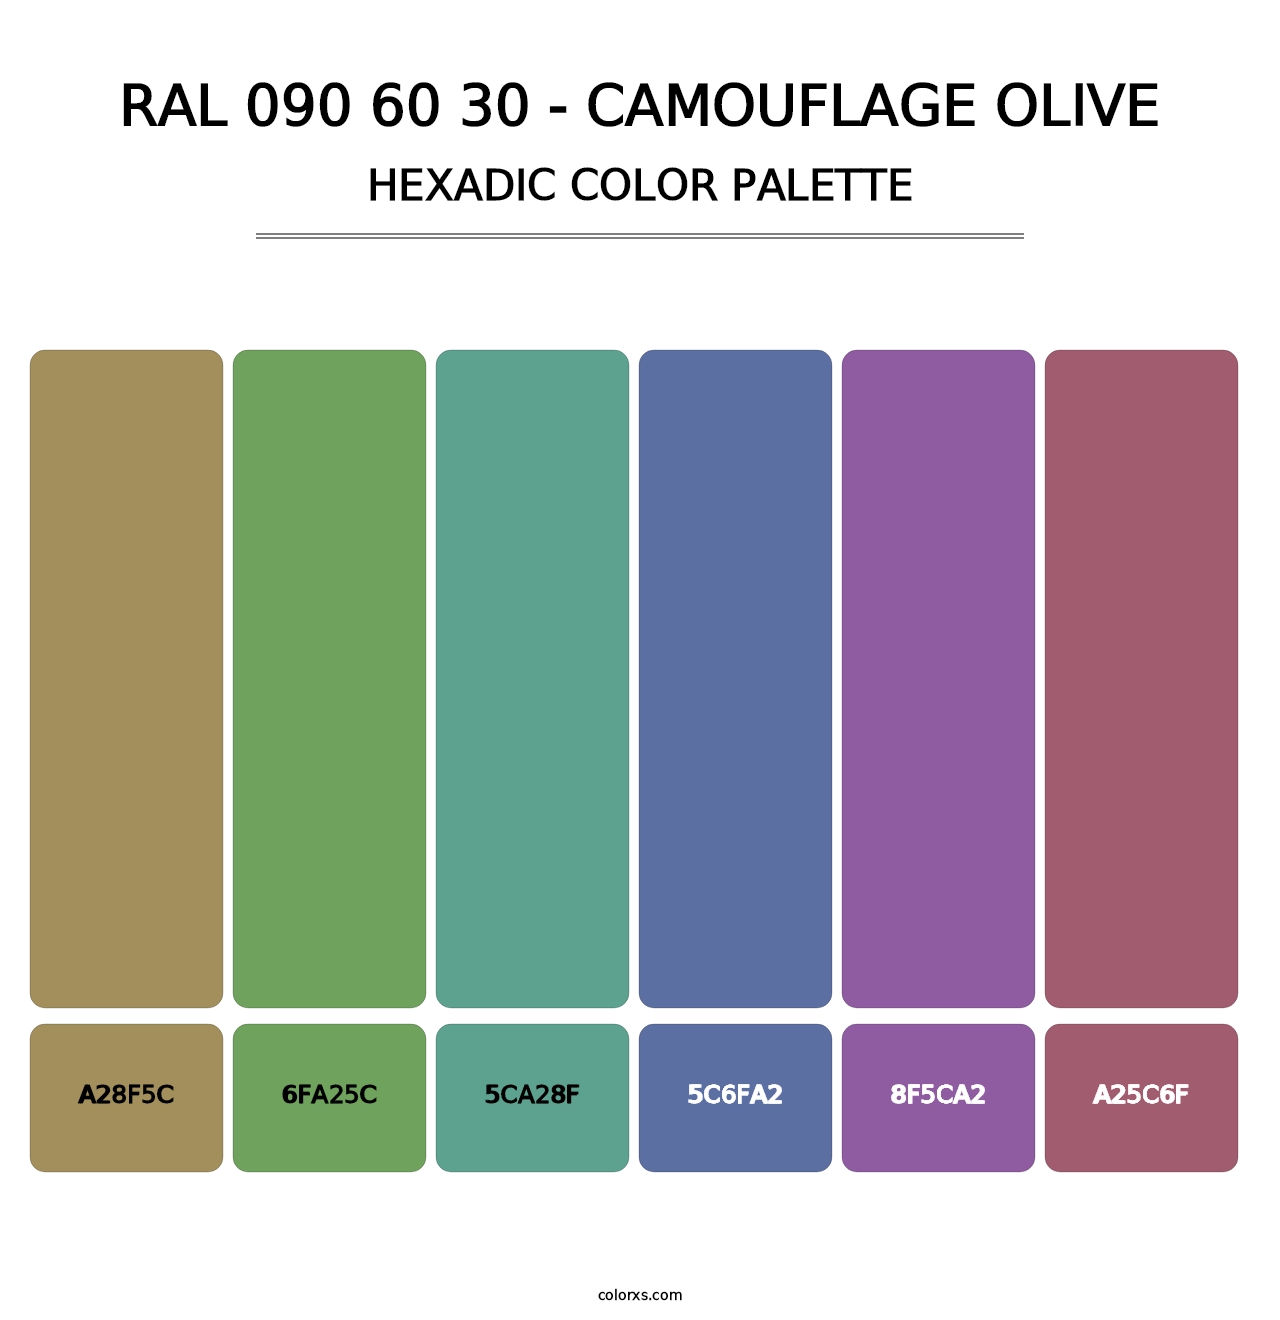 RAL 090 60 30 - Camouflage Olive - Hexadic Color Palette